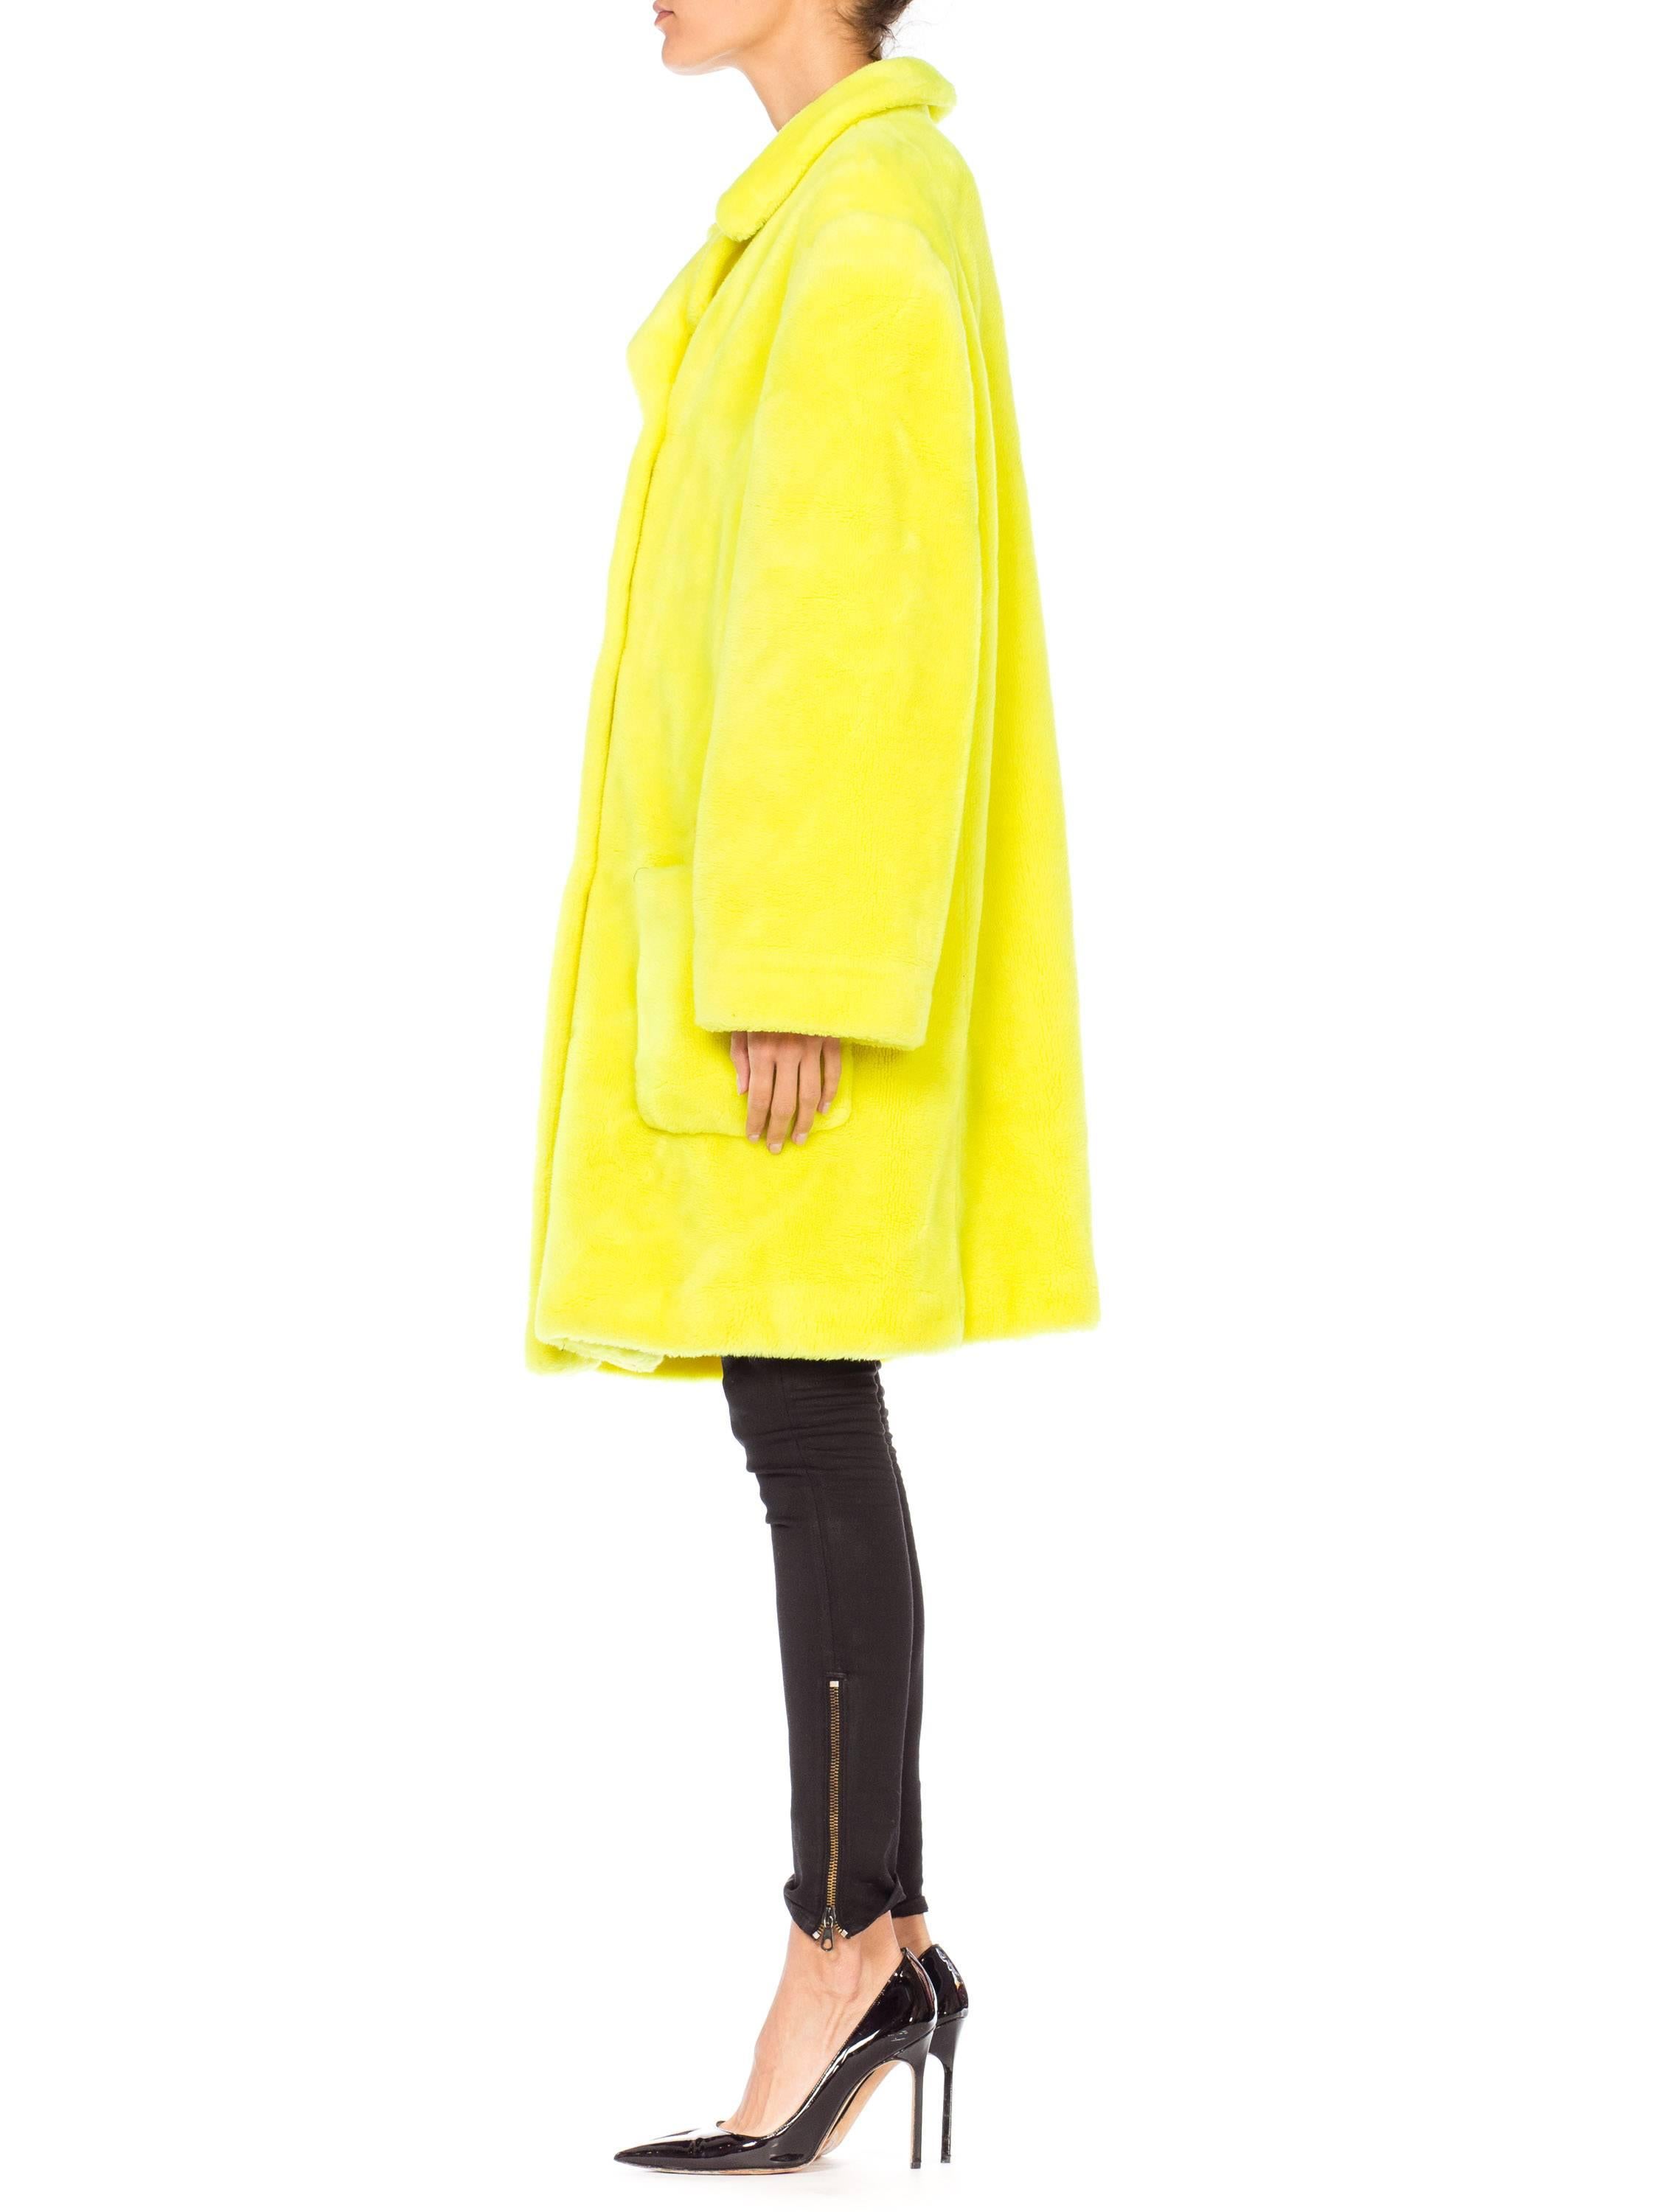 Stephen Sprouse Oversized Highlighter Yellow Faux Fur Coat, 1980s  4